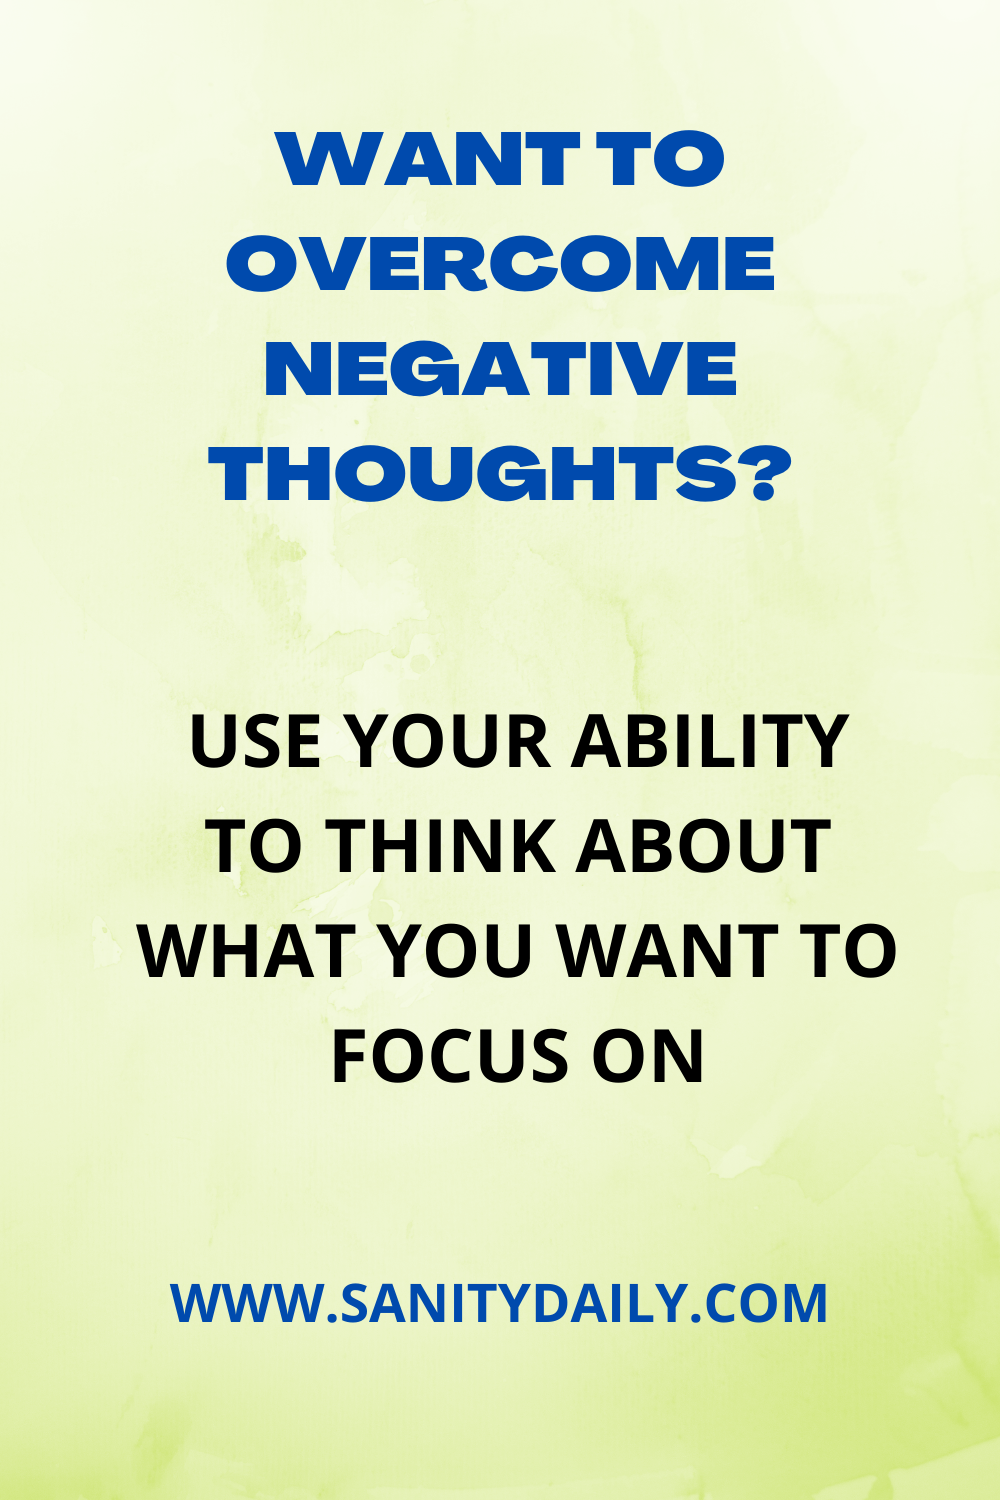 How to overcome negative thoughts?